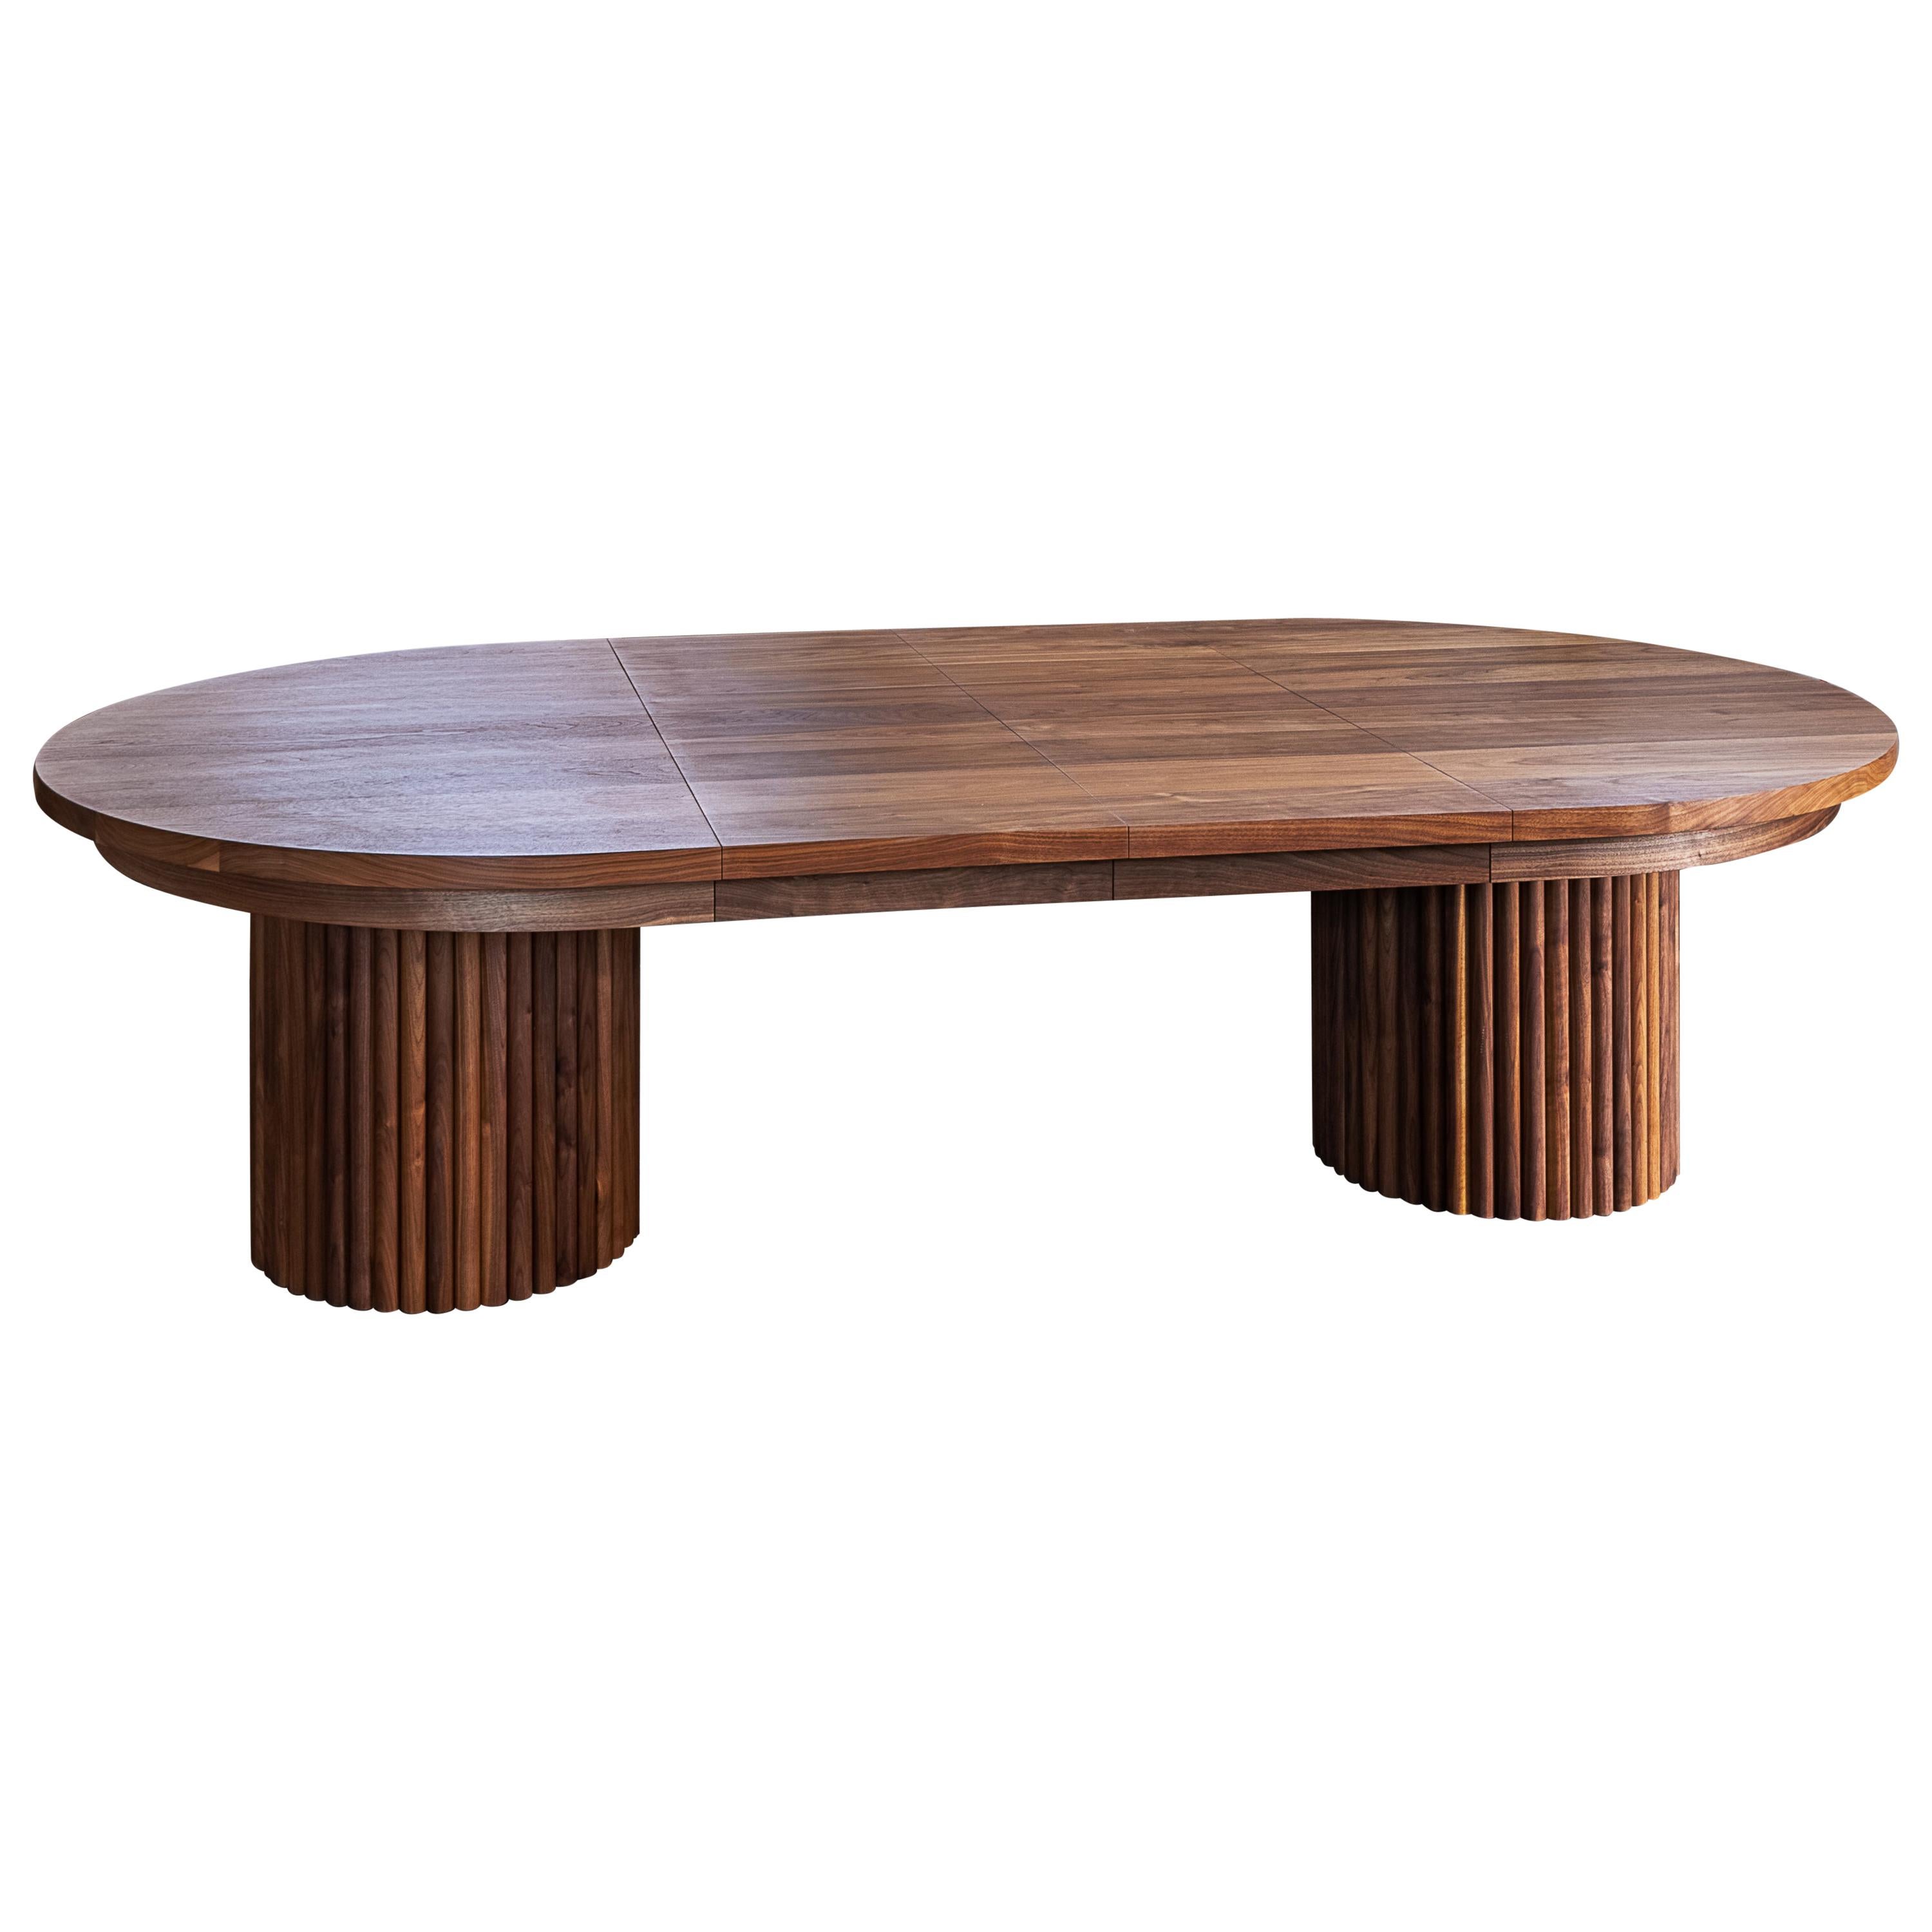 Brutalist Inspired "Marilyn" Dining Table with Adjustable Leaves by Kate Duncan